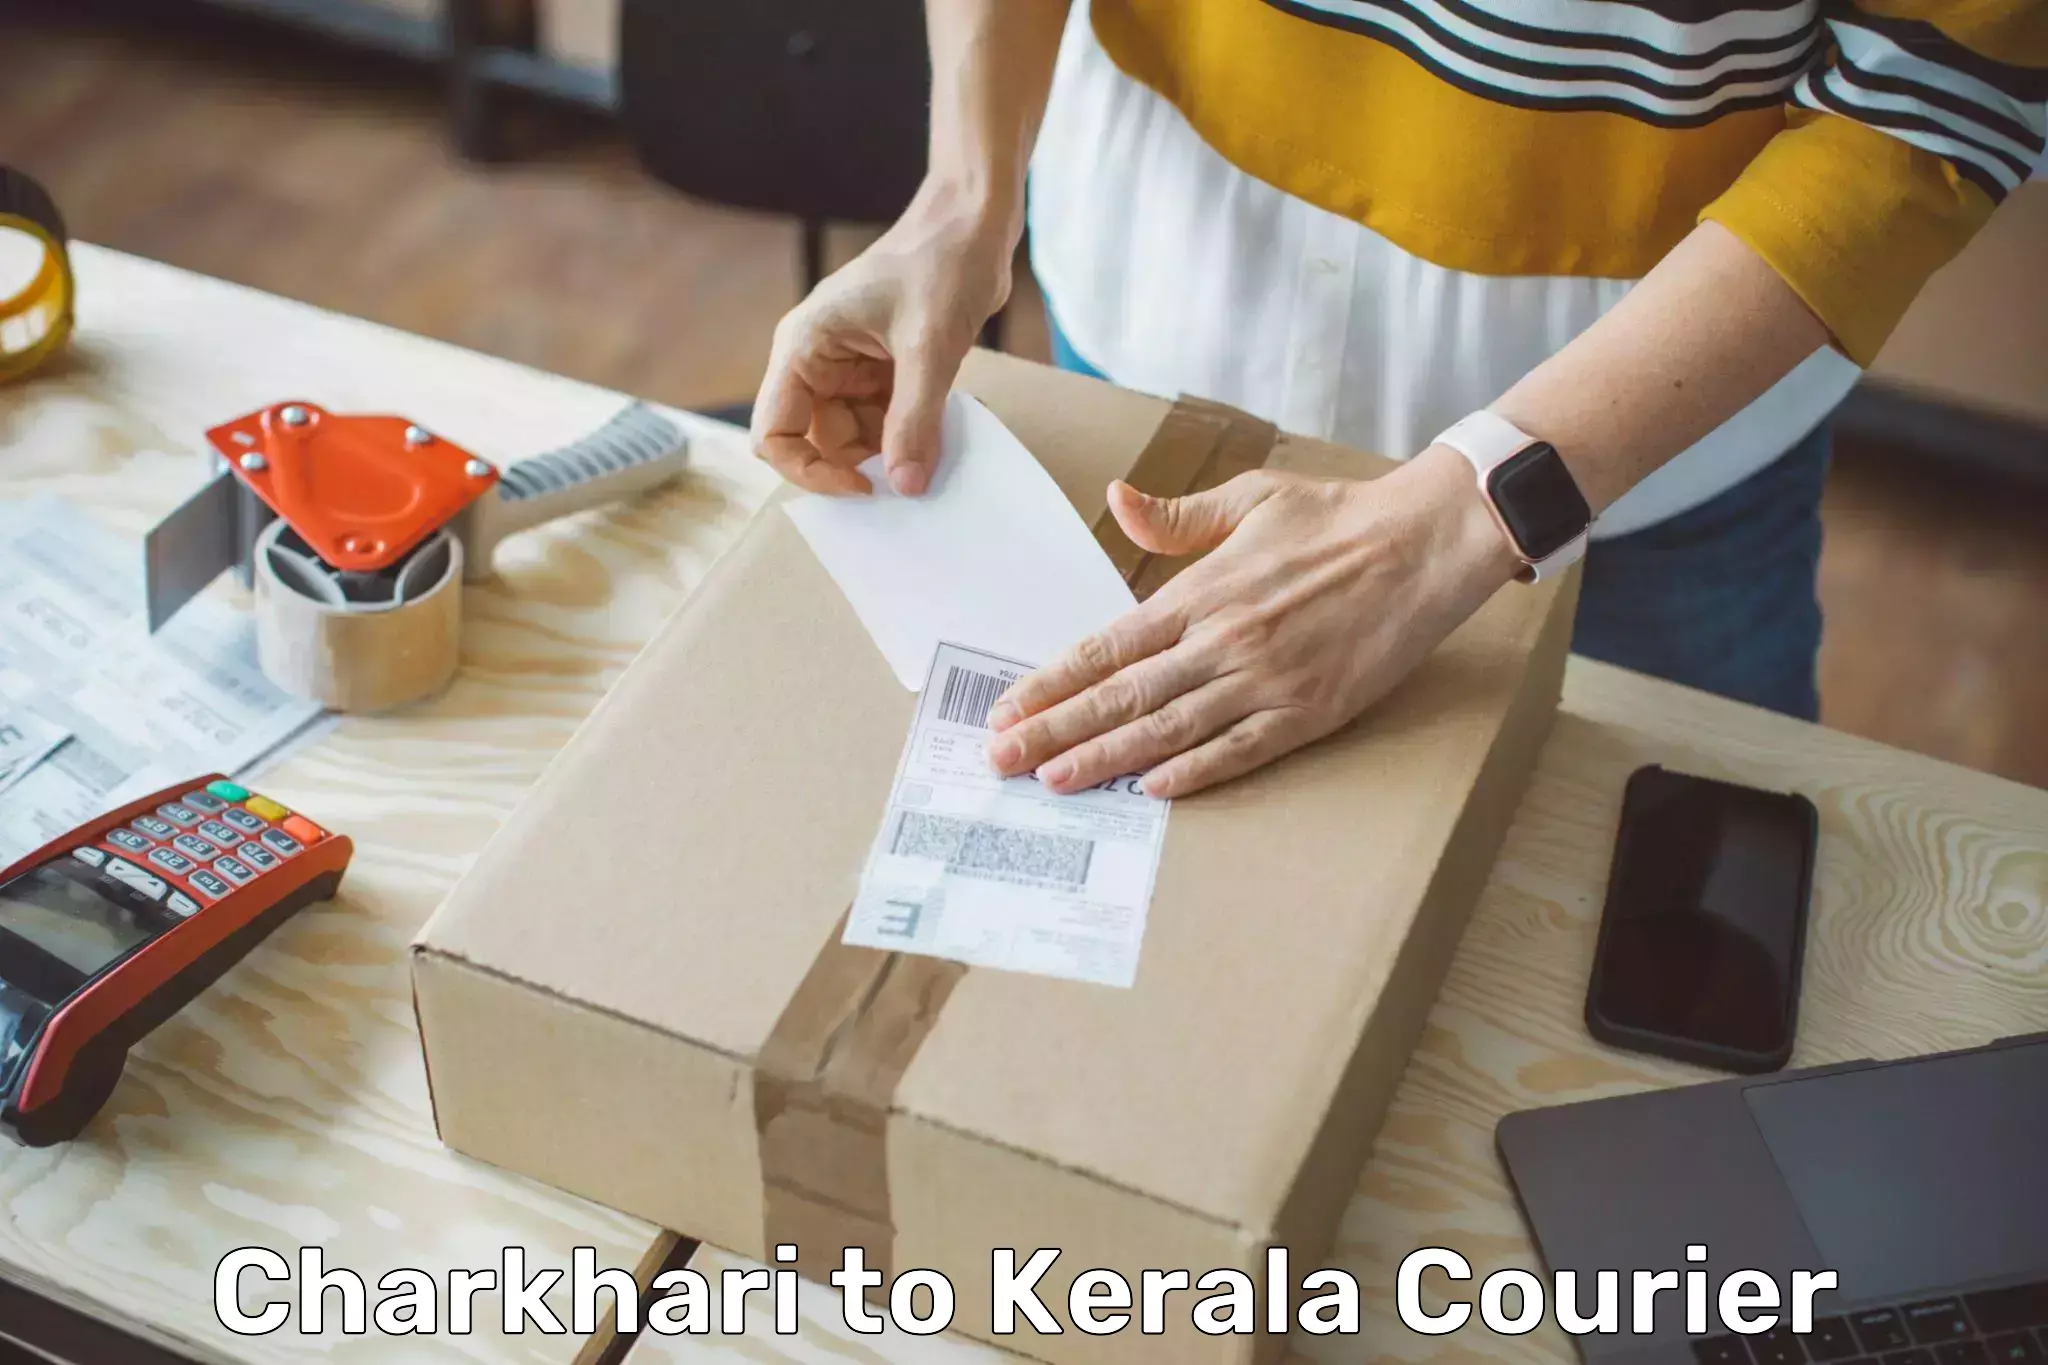 Business delivery service Charkhari to Kollam